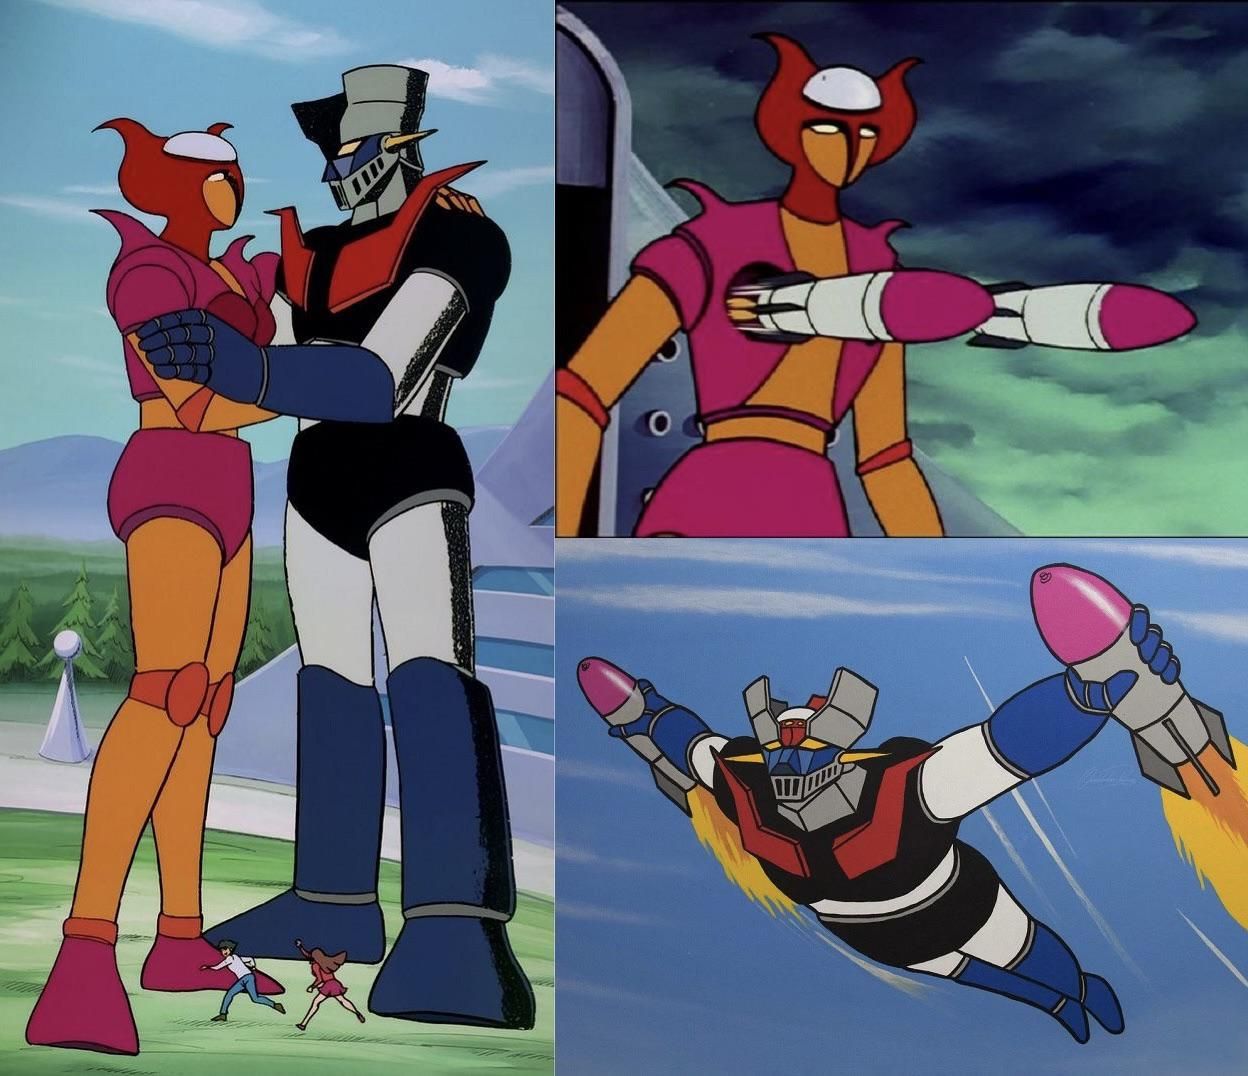 80s cartoons were different